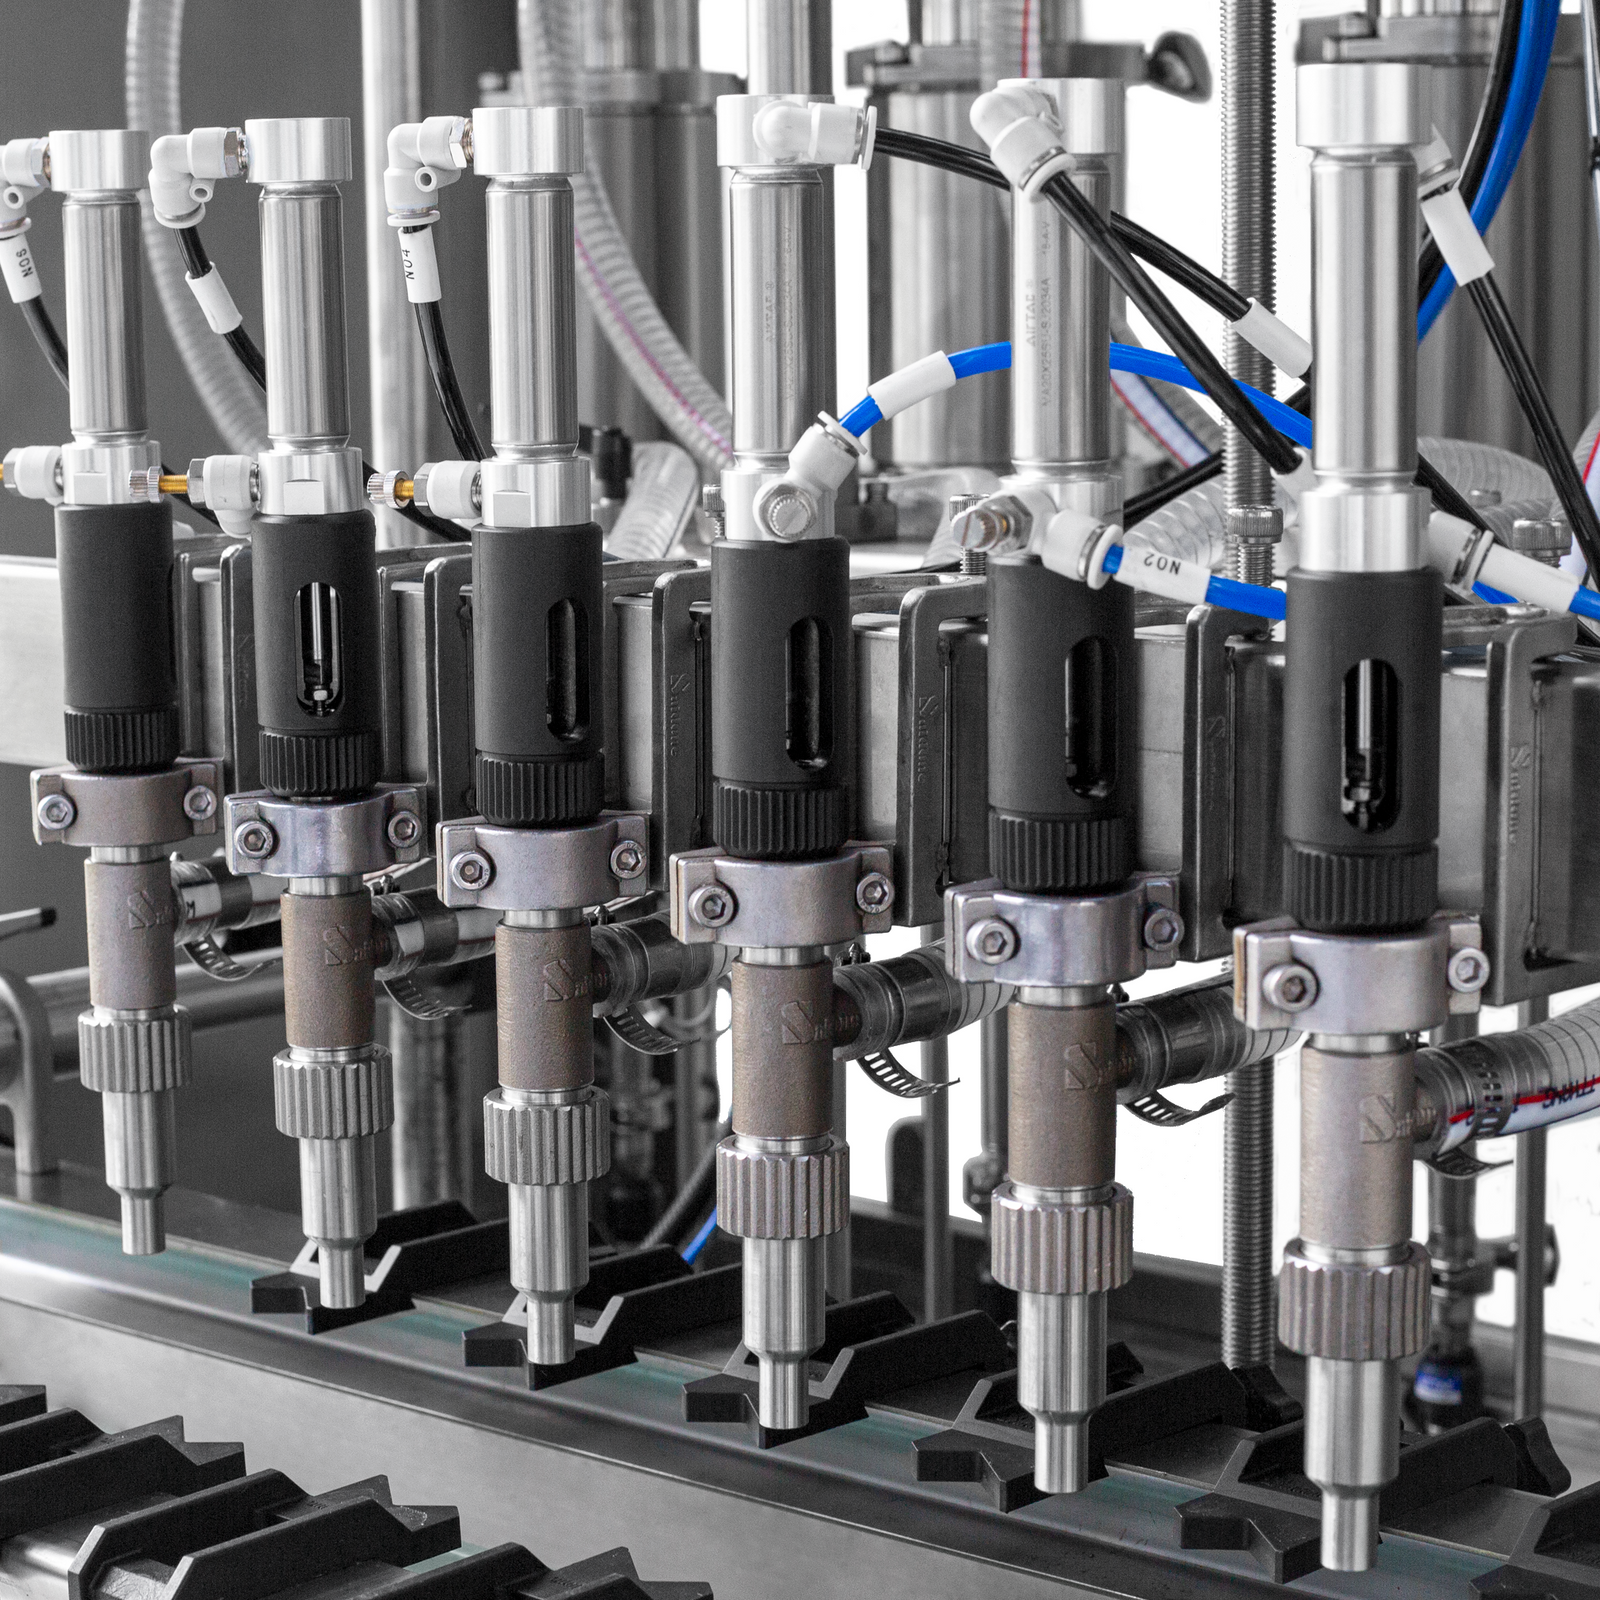 detailed closeup view of the 6 dispensing nozzles and the hose mechanism of the low viscosity Jorestech piston filling system